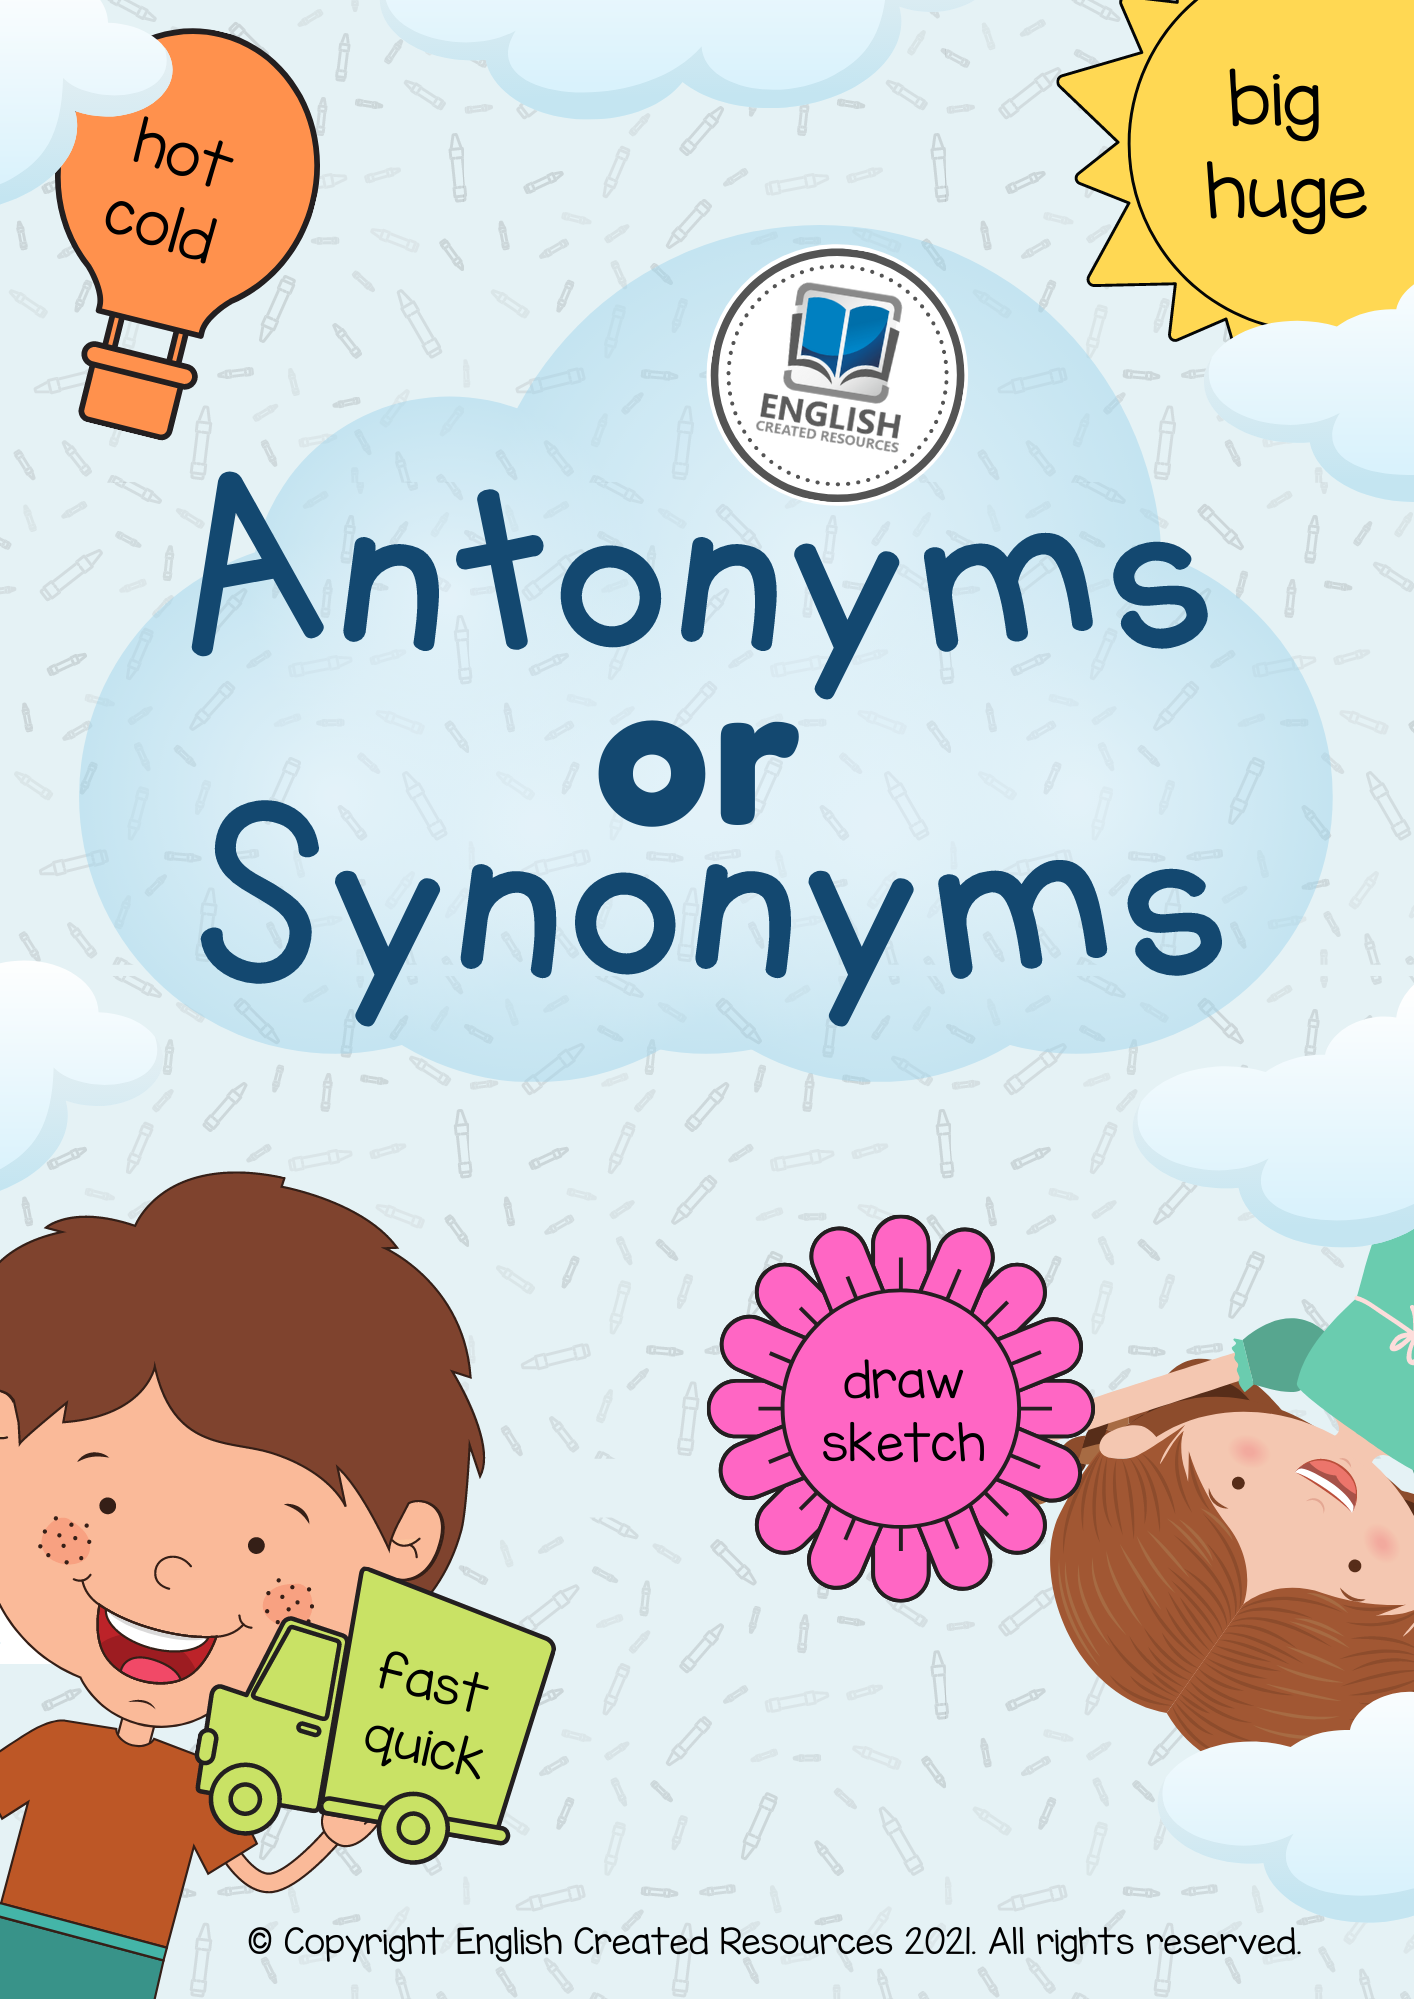 synonyms-and-antonyms-activity-book-english-created-resources